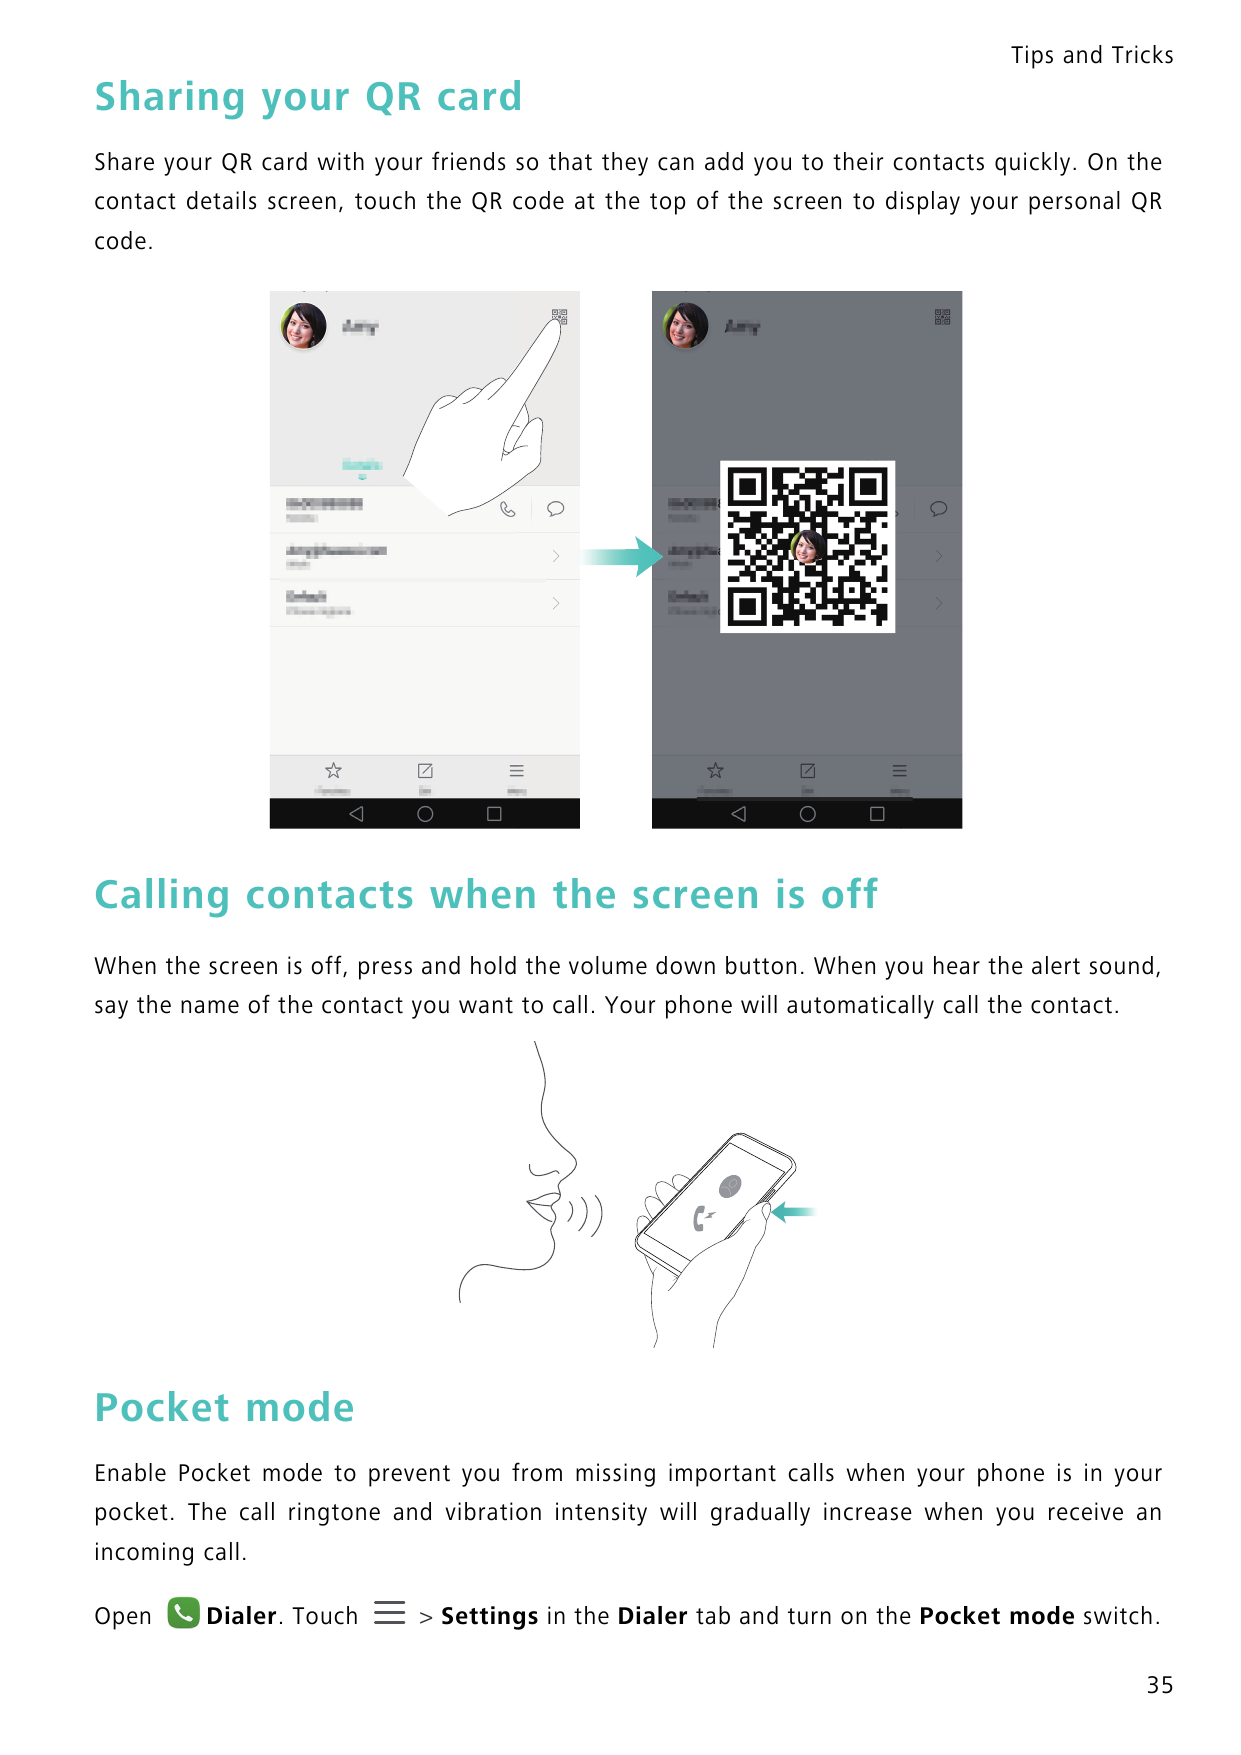 Tips and TricksSharing your QR cardShare your QR card with your friends so that they can add you to their contacts quickly. On t